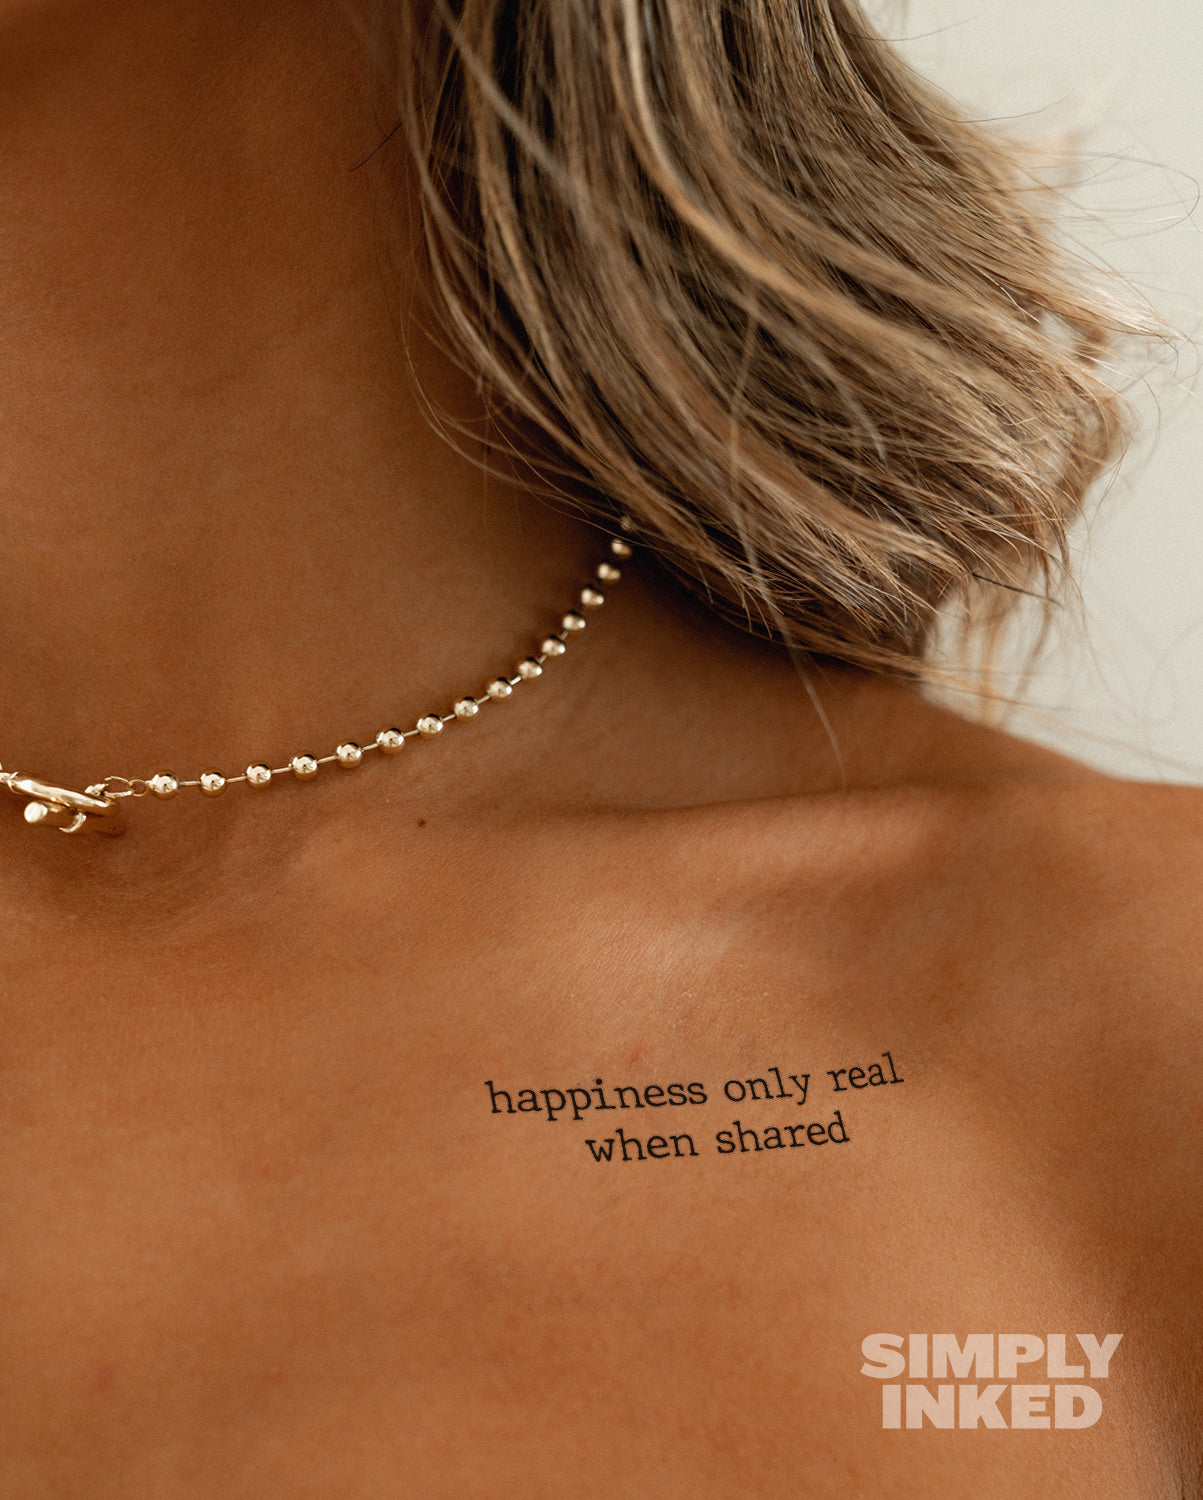 NEW Happiness only real when shared Tattoo